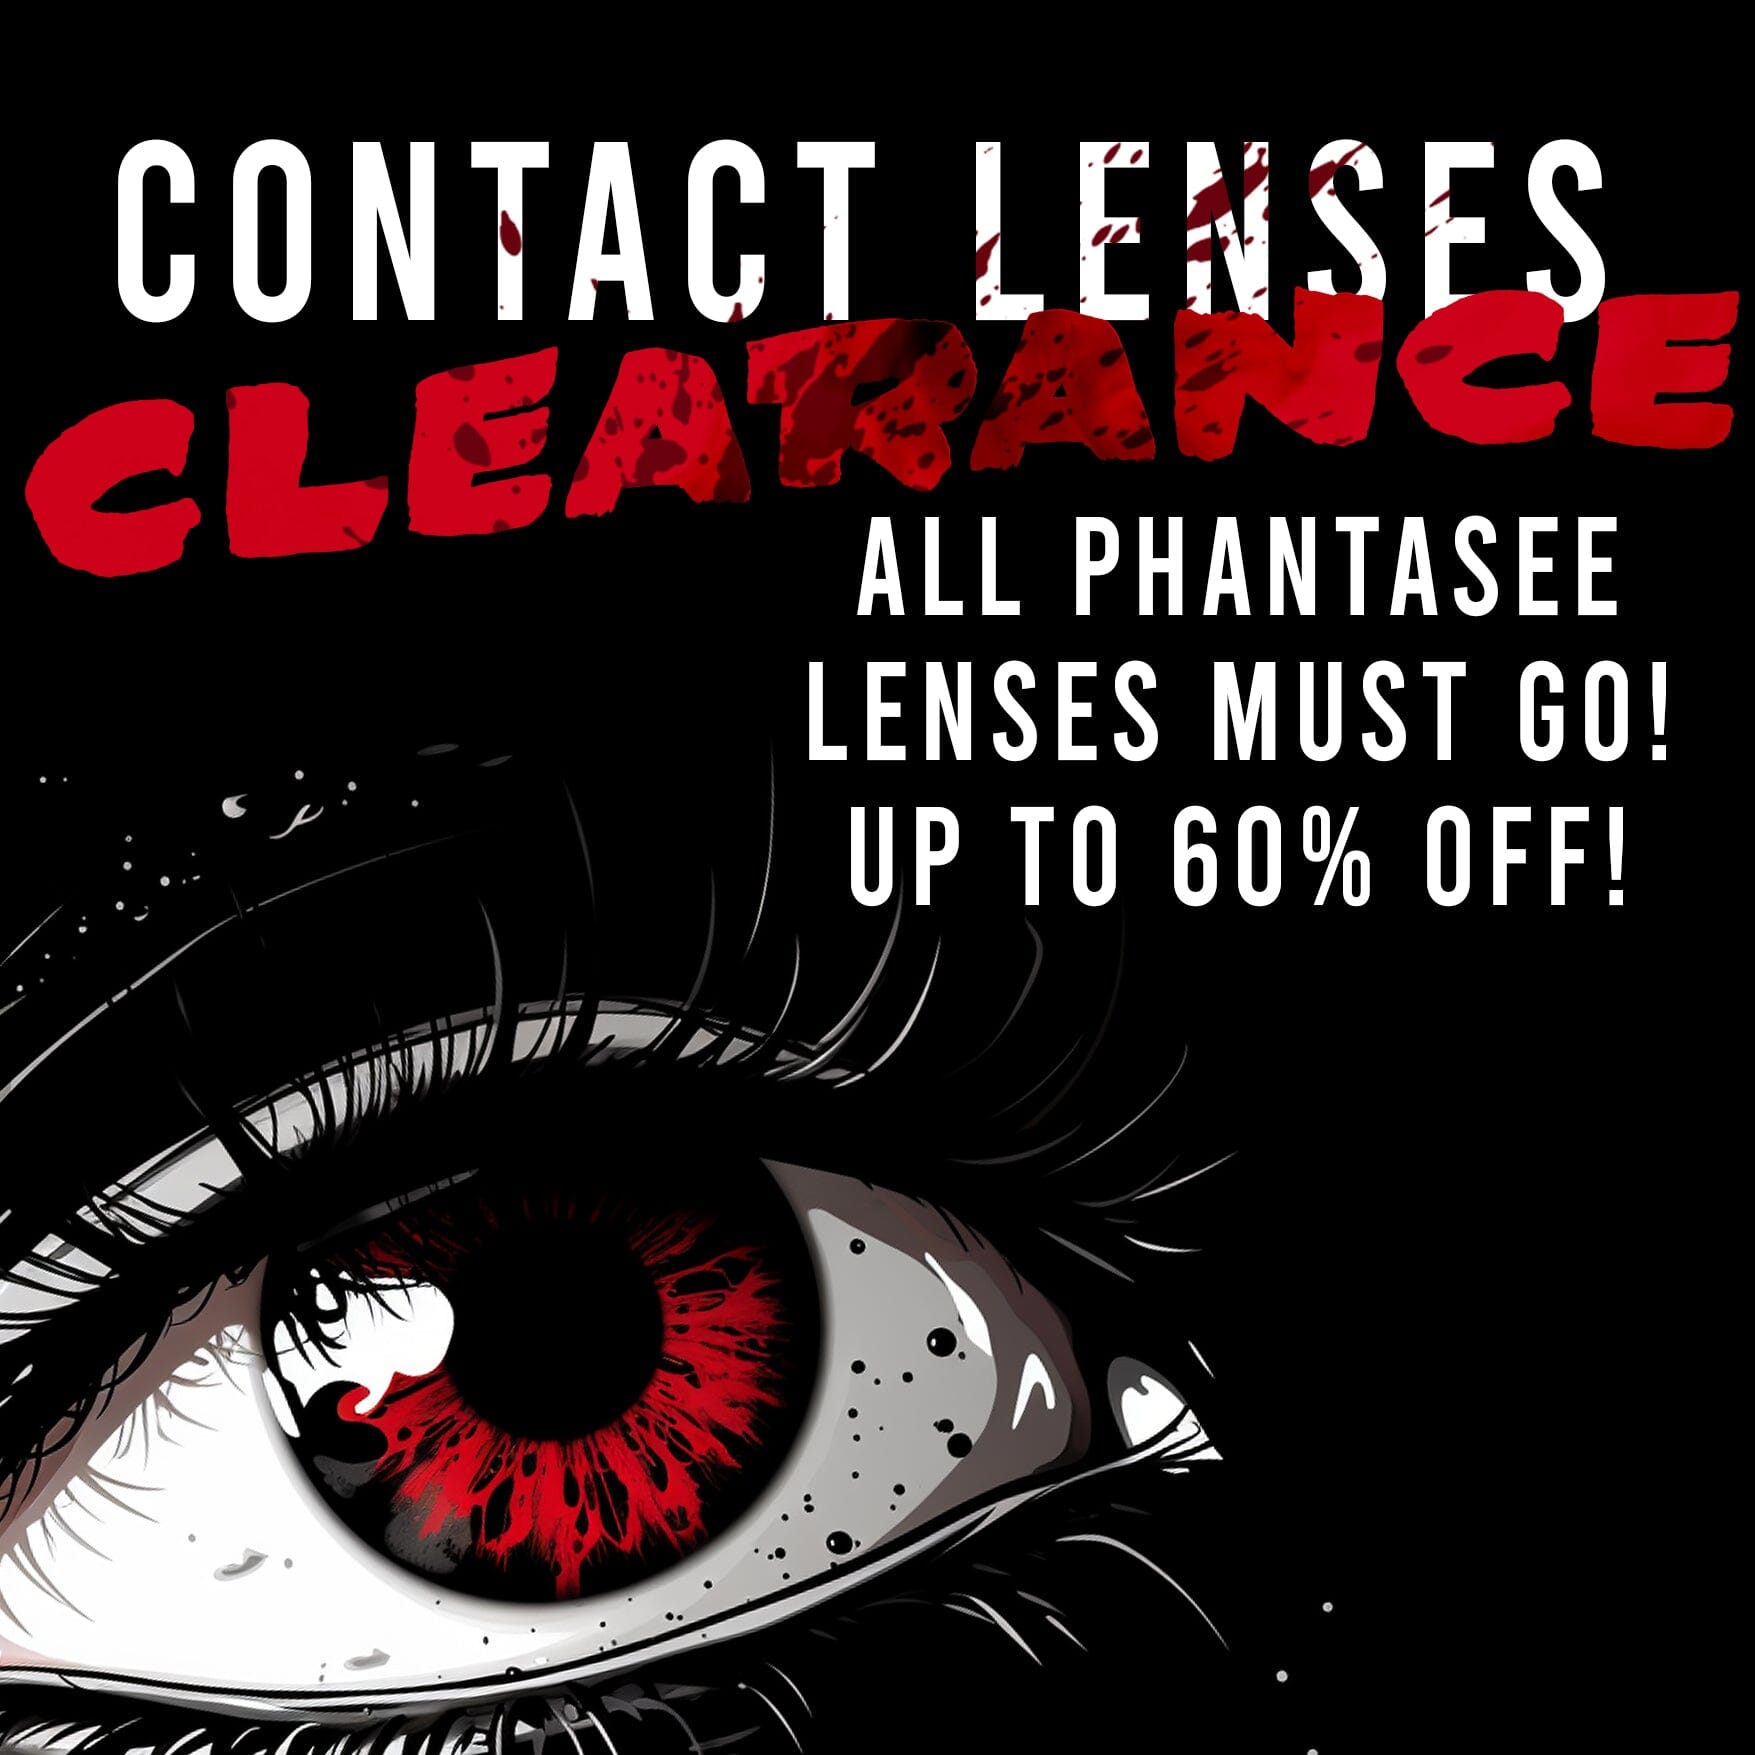 Contact Lens - Clearance